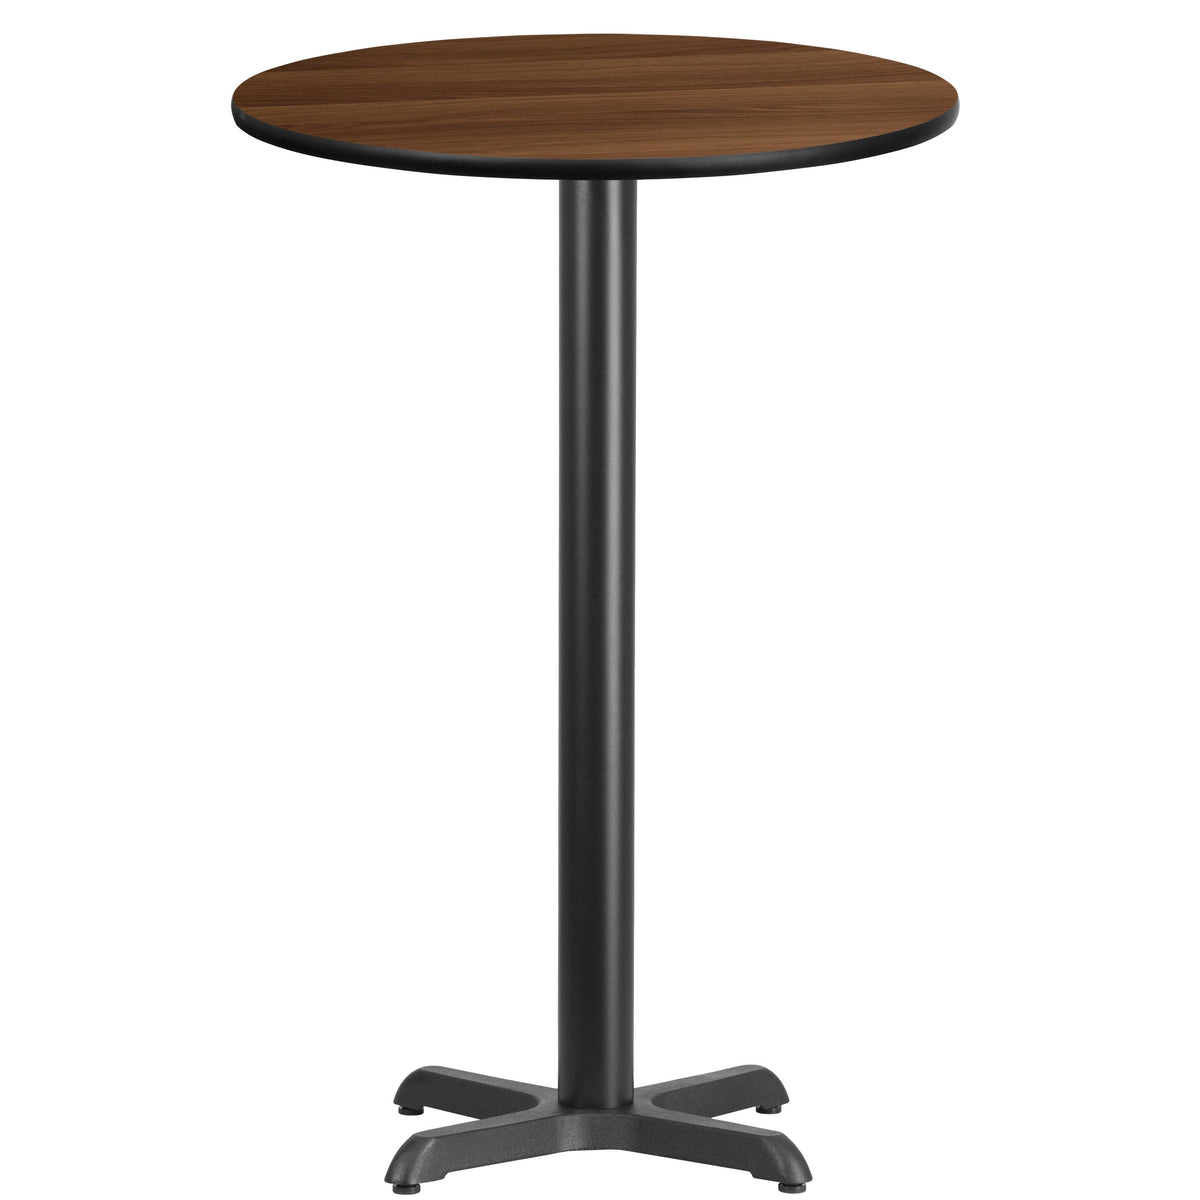 Walnut |#| 24inch Round Walnut Laminate Table Top with 22inch x 22inch Bar Height Table Base